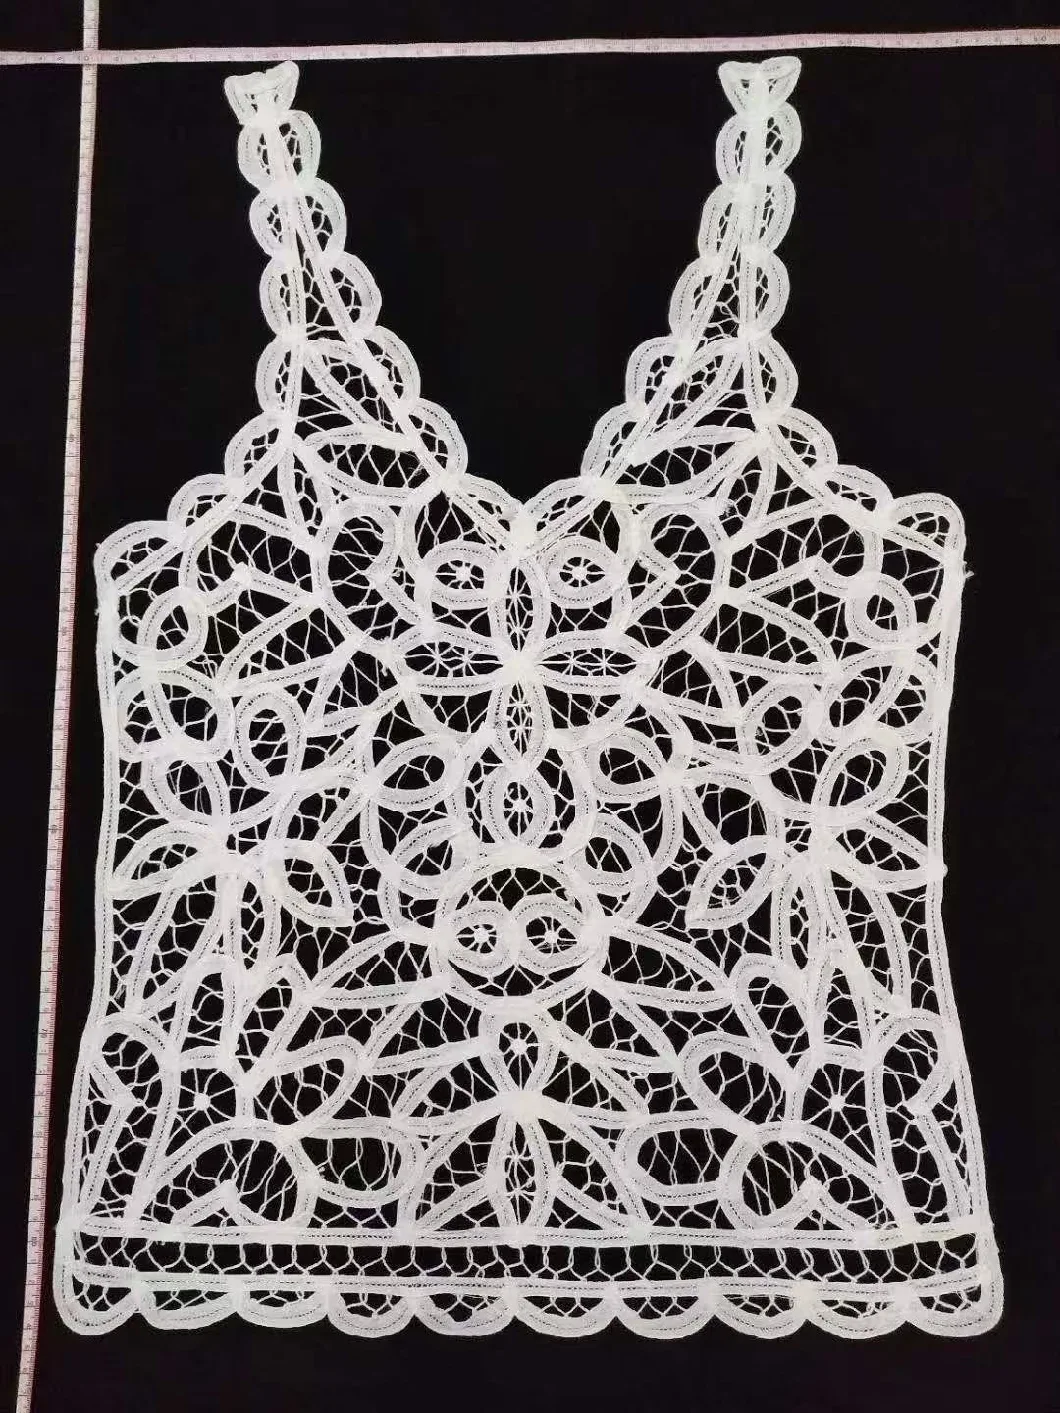 Hot Sale High Quality Embroidered Motif Neckline Cotton Lace Collar Sewing